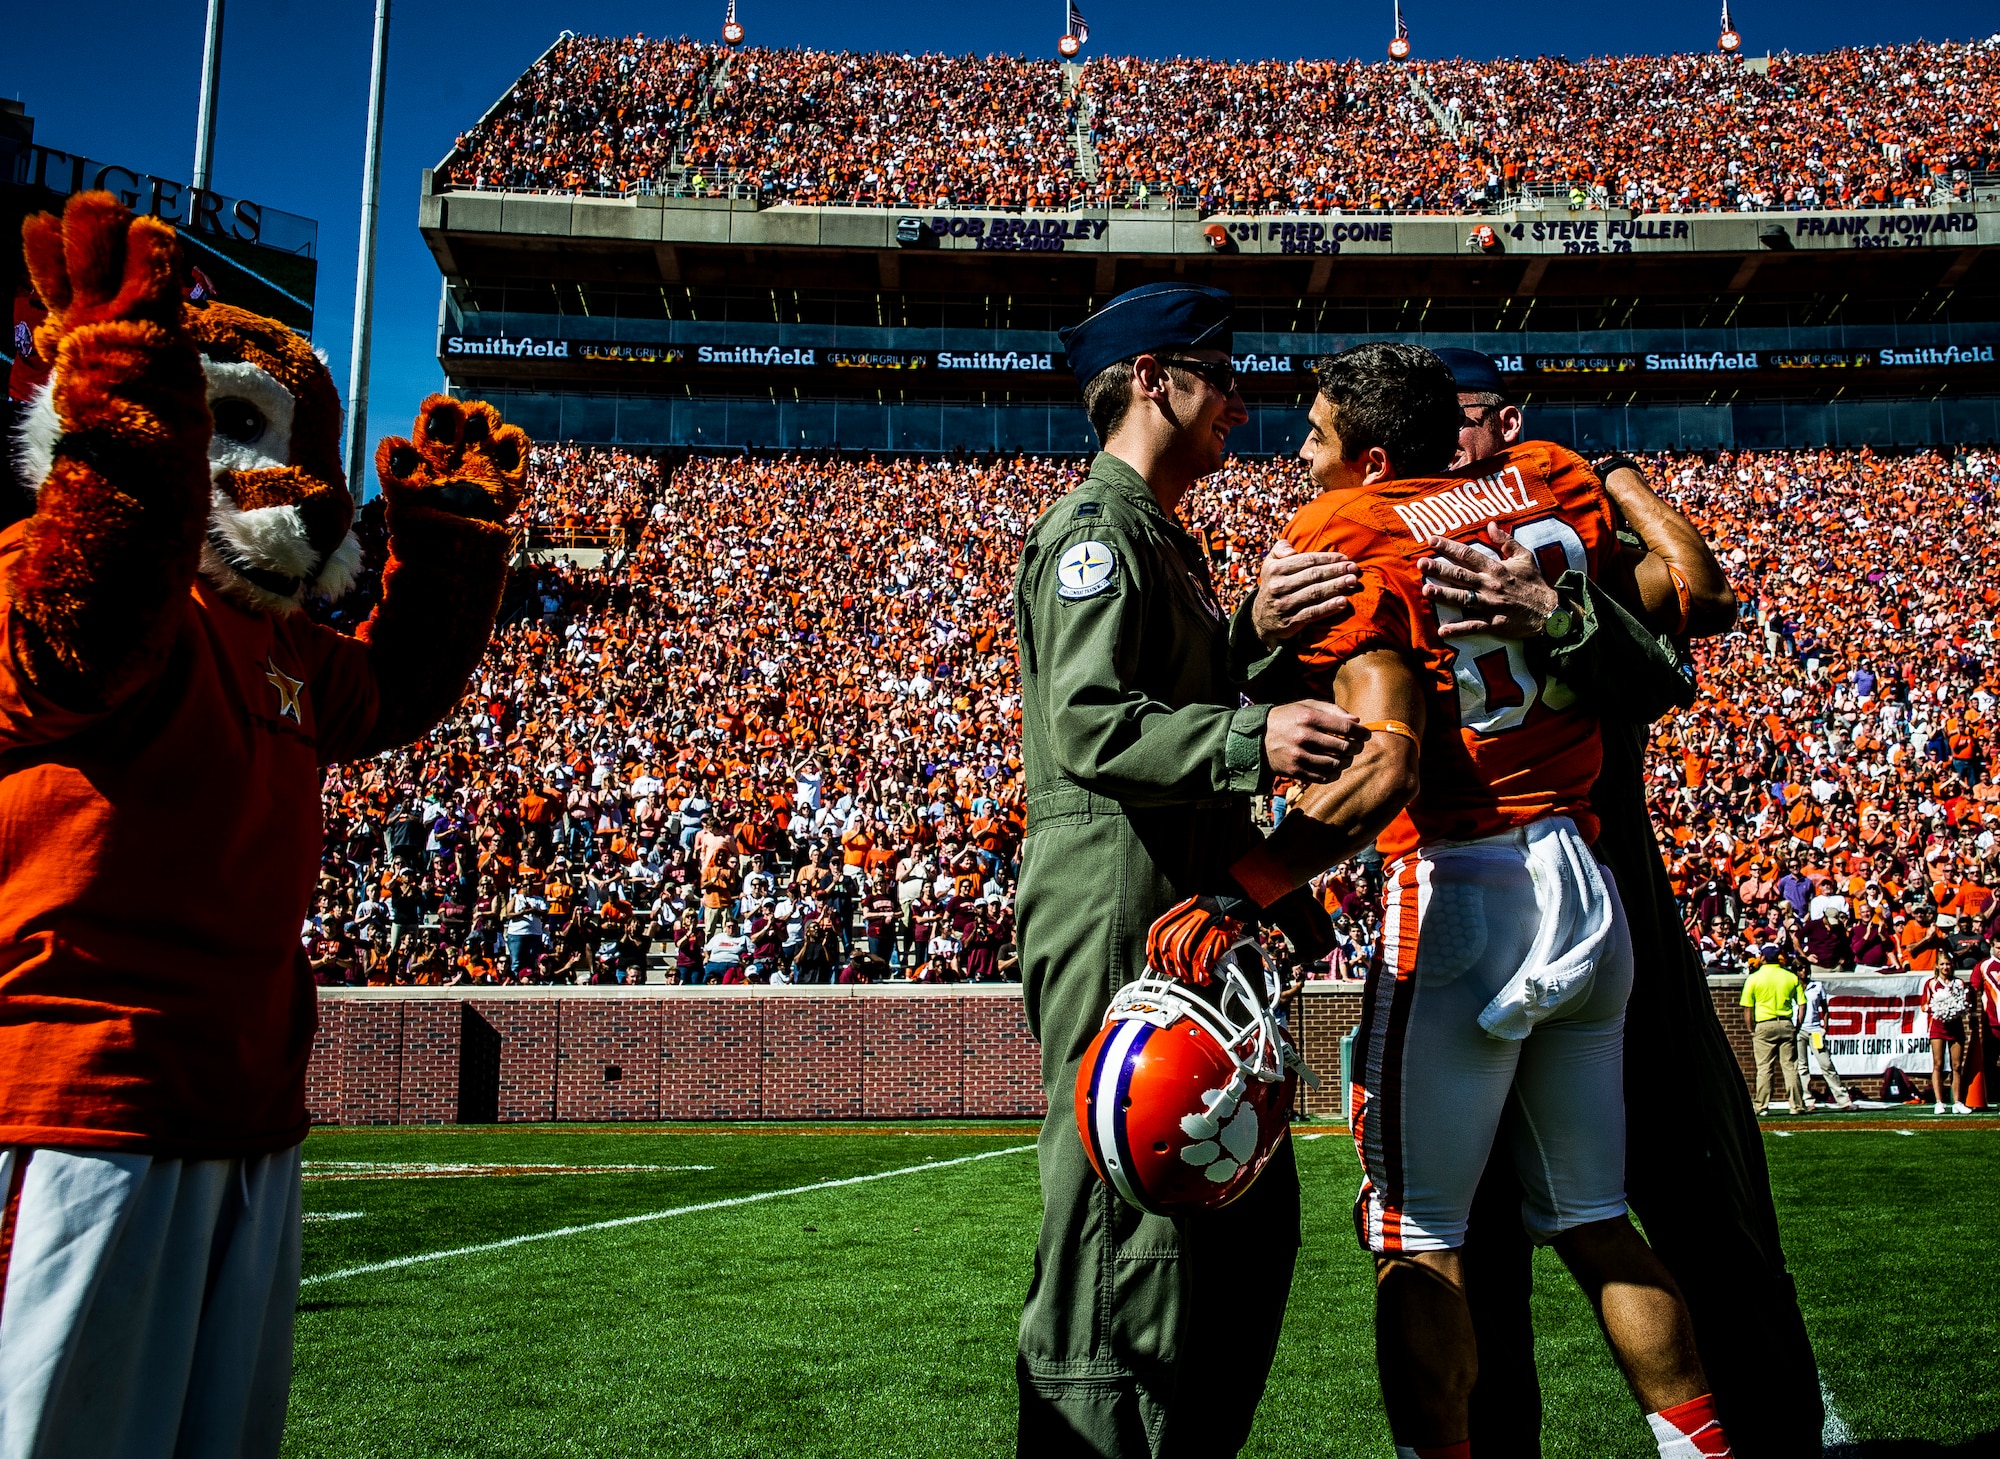 Former Army Sgt. Daniel Rodriguez, now a wide receiver for the Clemson tigers, hugs Capt. Justin Kulish (left) and Capt. Michael Polidor (right), B-2 Bomber pilots from Whiteman Air Force Base, Mo., during a ceremony Oct. 20, 2012, at Memorial Stadium, Clemson S.C. The two pilots were recognized for their efforts providing close-air support during an insurgent ambush of Command Outpost Keating in October 2009. Rodriguez was deployed to the outpost during the attack. (U.S. Air Force photo/Senior Airman Dennis Sloan)